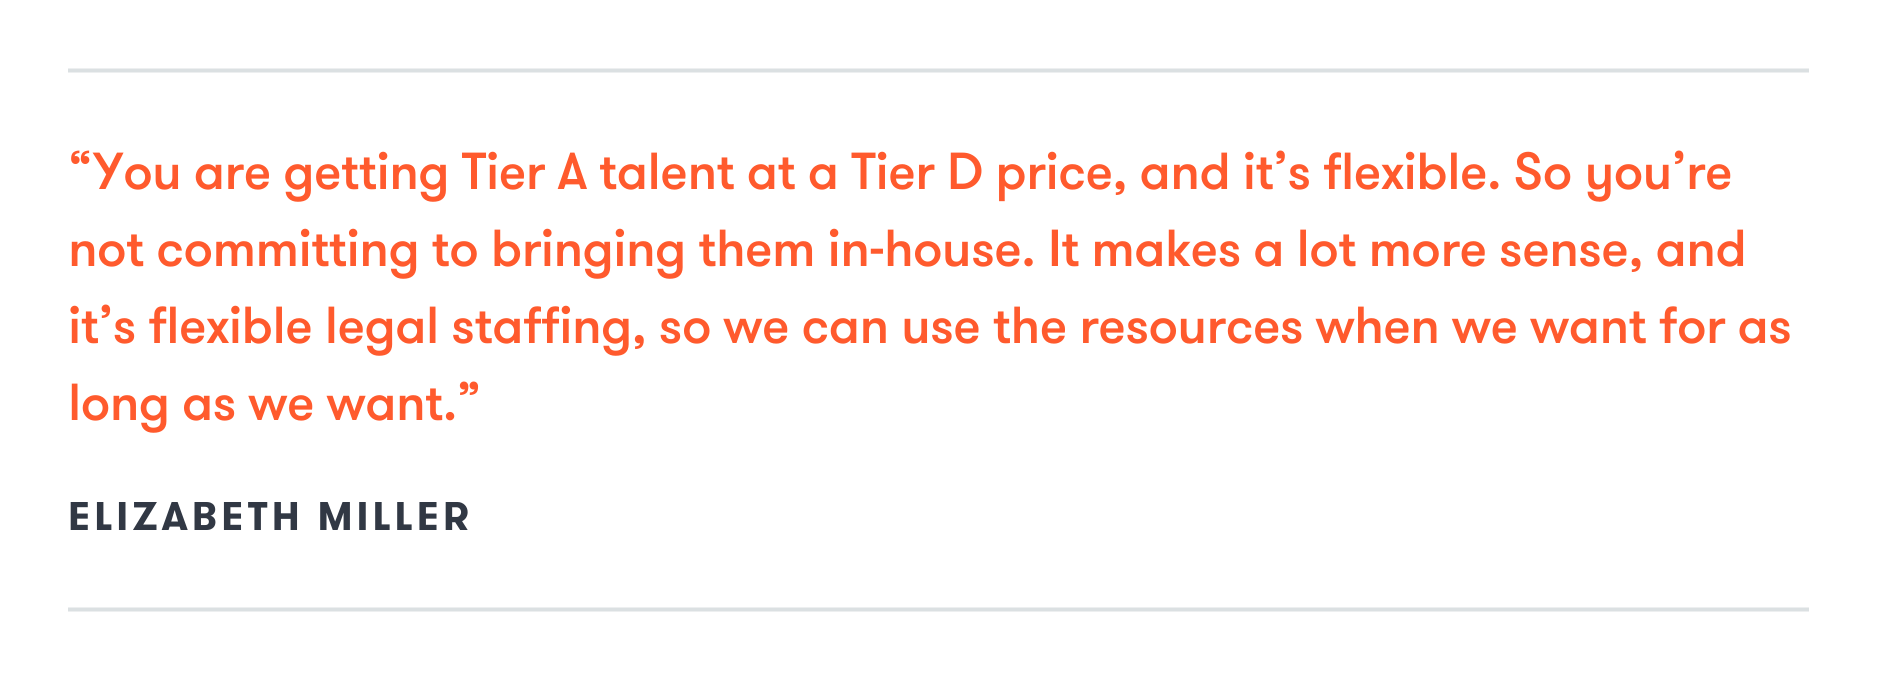 Image of quote by Elizabeth Miller stating "You are getting Tier A talent at a Tier D price, and it's flexible. So you're not committing to bringing them in-house. It makes a lot more sense, and it's flexible legal staffing, so we can use resources when we want for as long as we want."